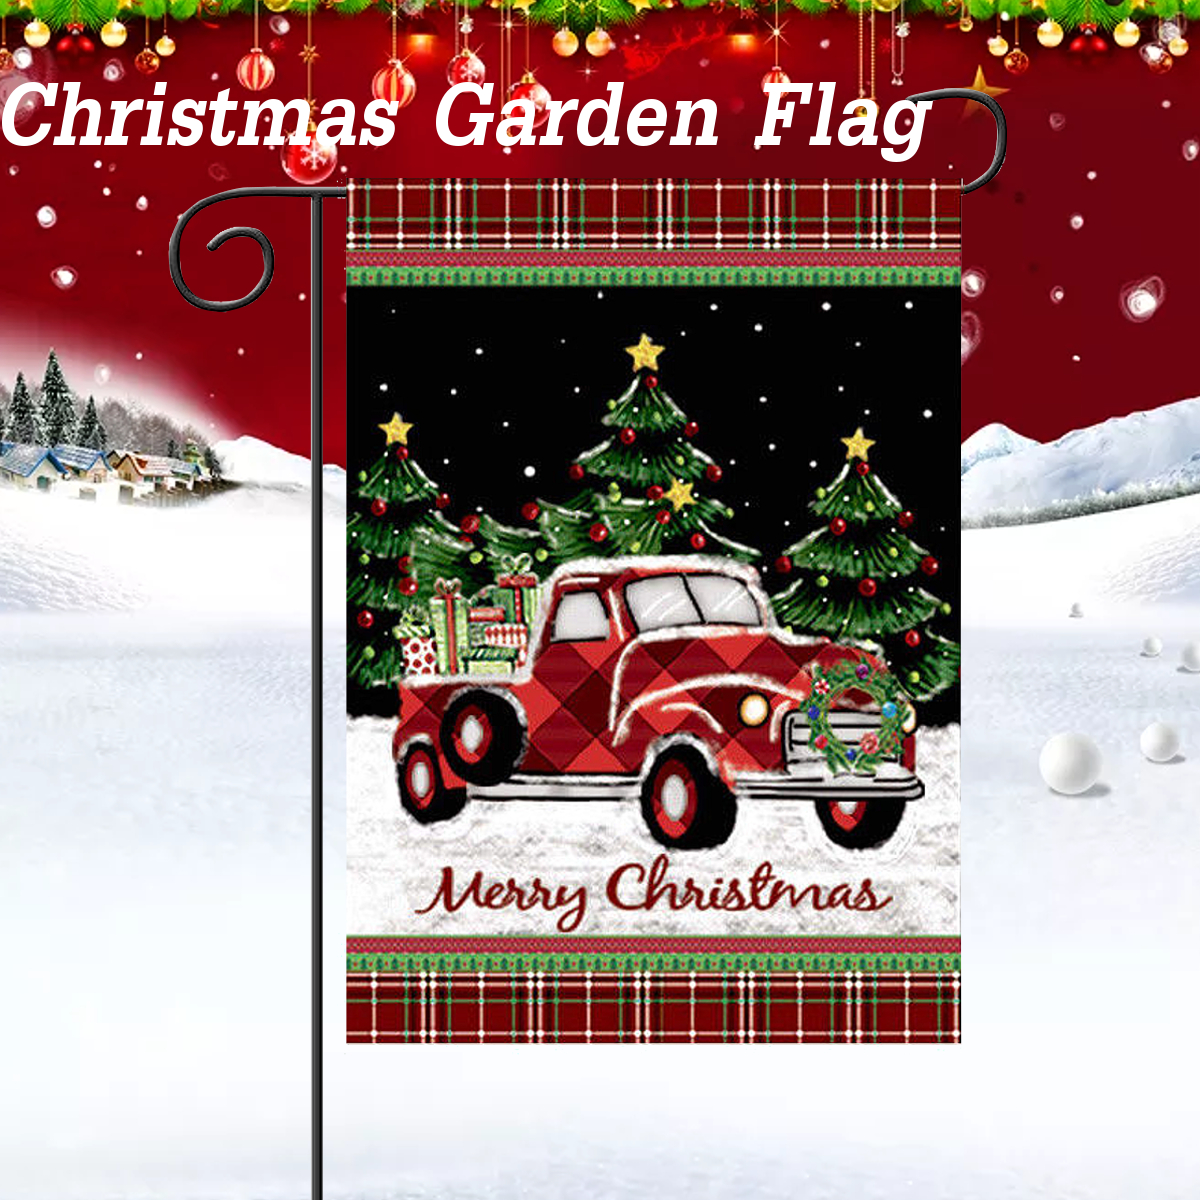 Merry-Christmas-Decorations-Red-Truck-With-Gifts-Double-Sided-Winter-Garden-Flag-1400600-2